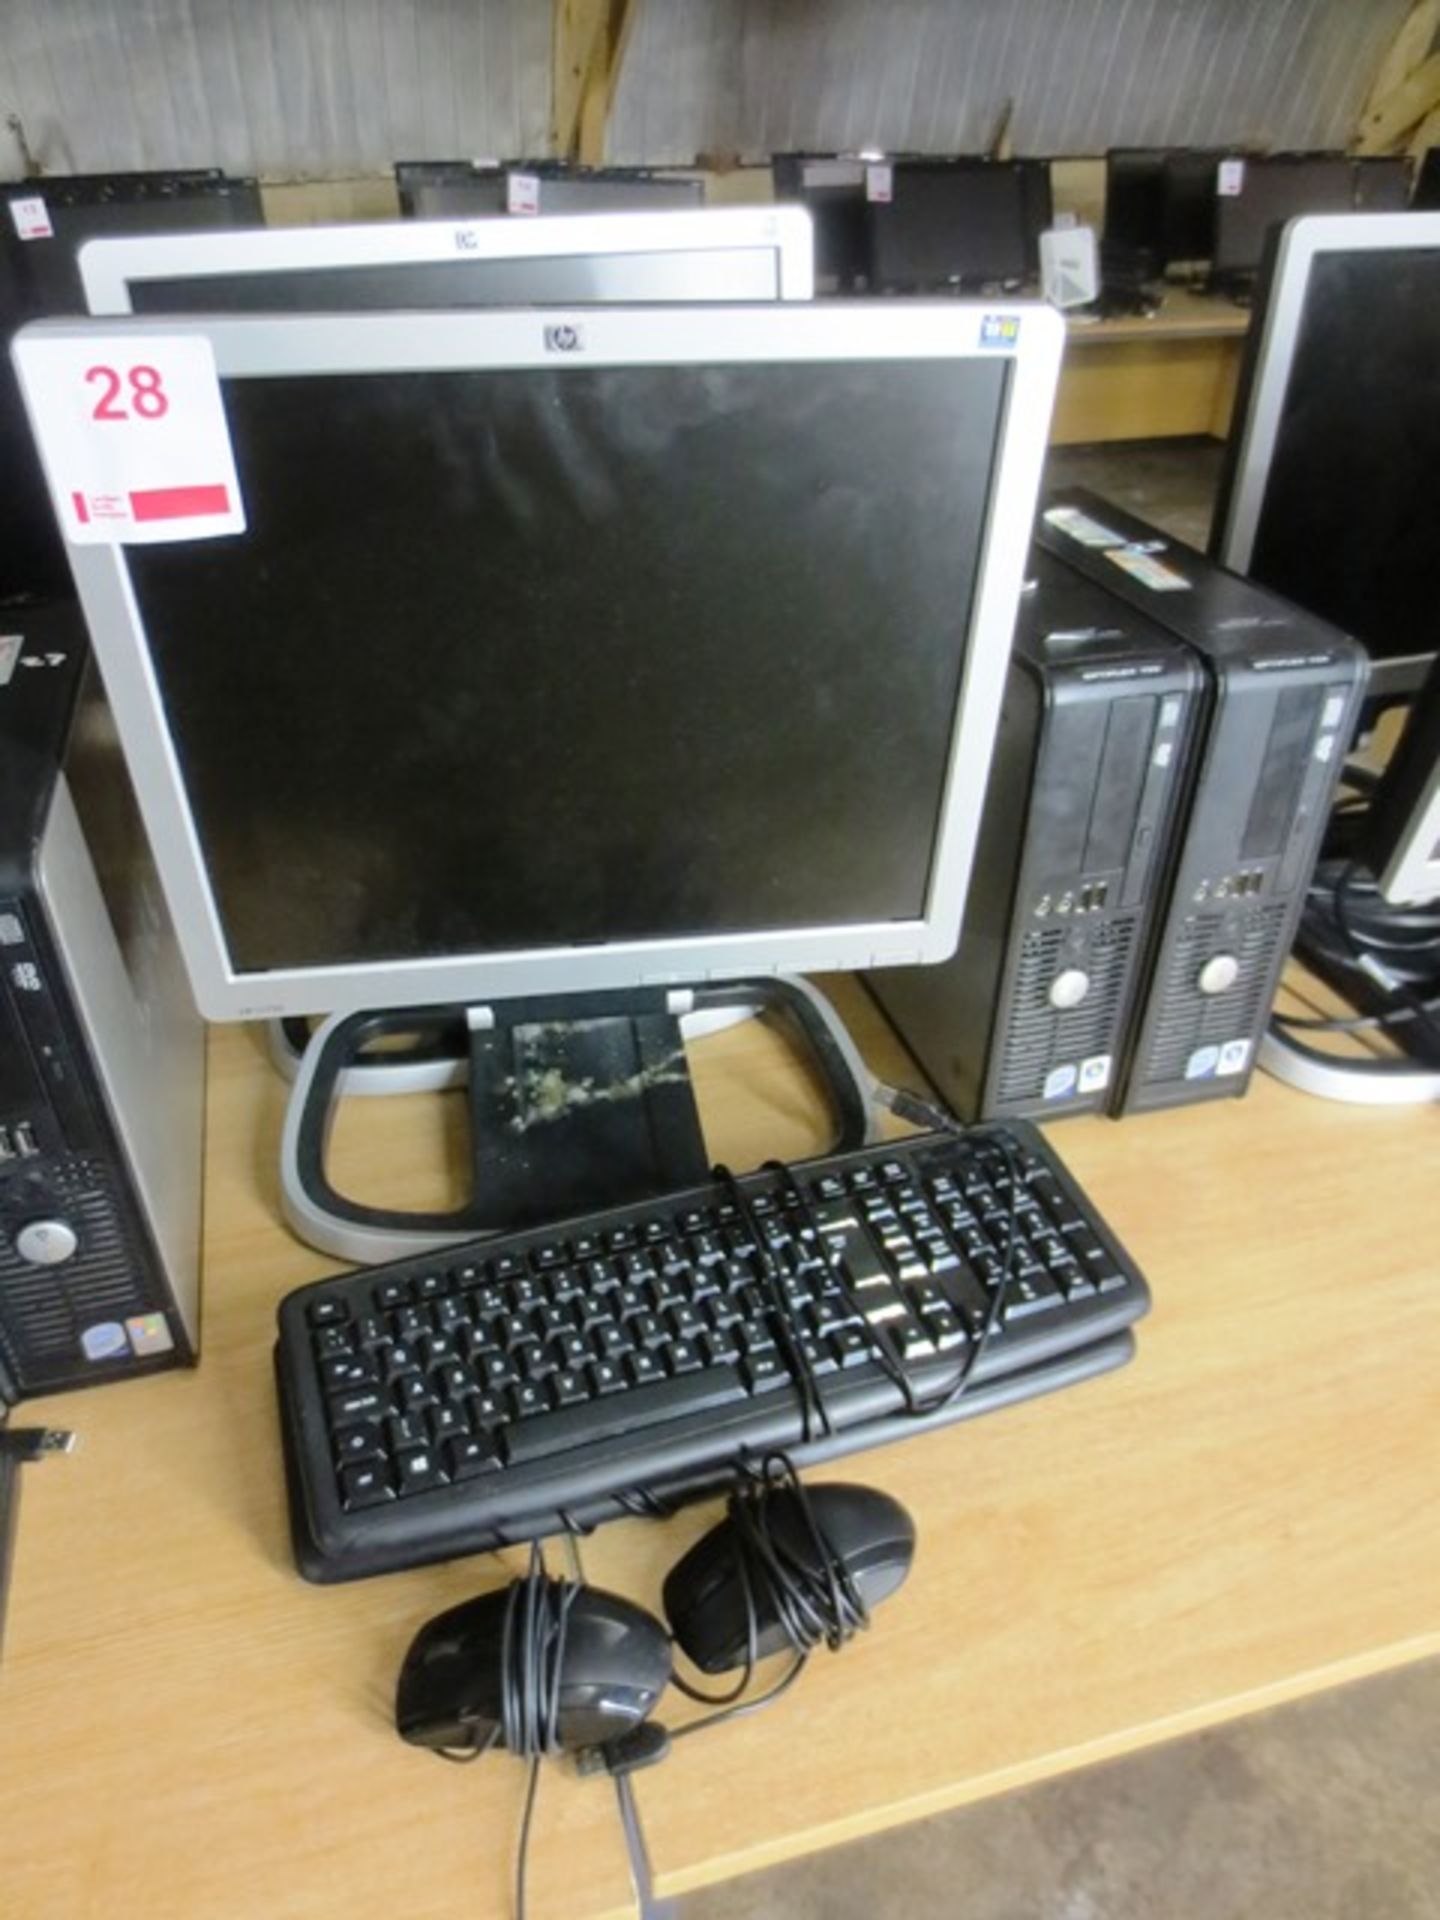 Two Dell Optiplex 755 desktop PCs, serial nos: HVKY04J and 7CP673J, two HP flat screen monitors,